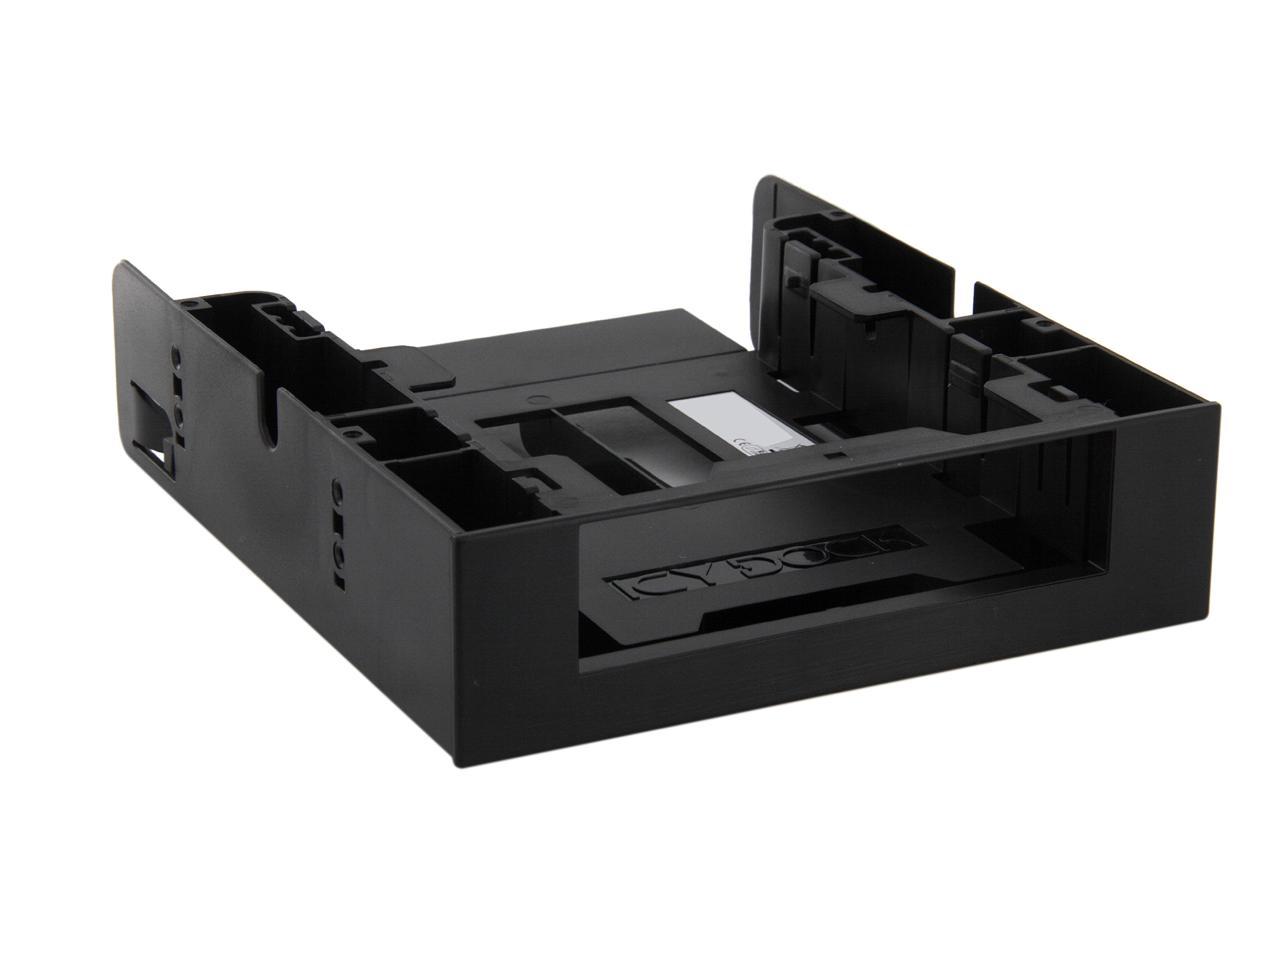 ICY DOCK Dual 2.5 SSD 1 x 3.5 HDD Device Bay to 5.25 Drive Bay 